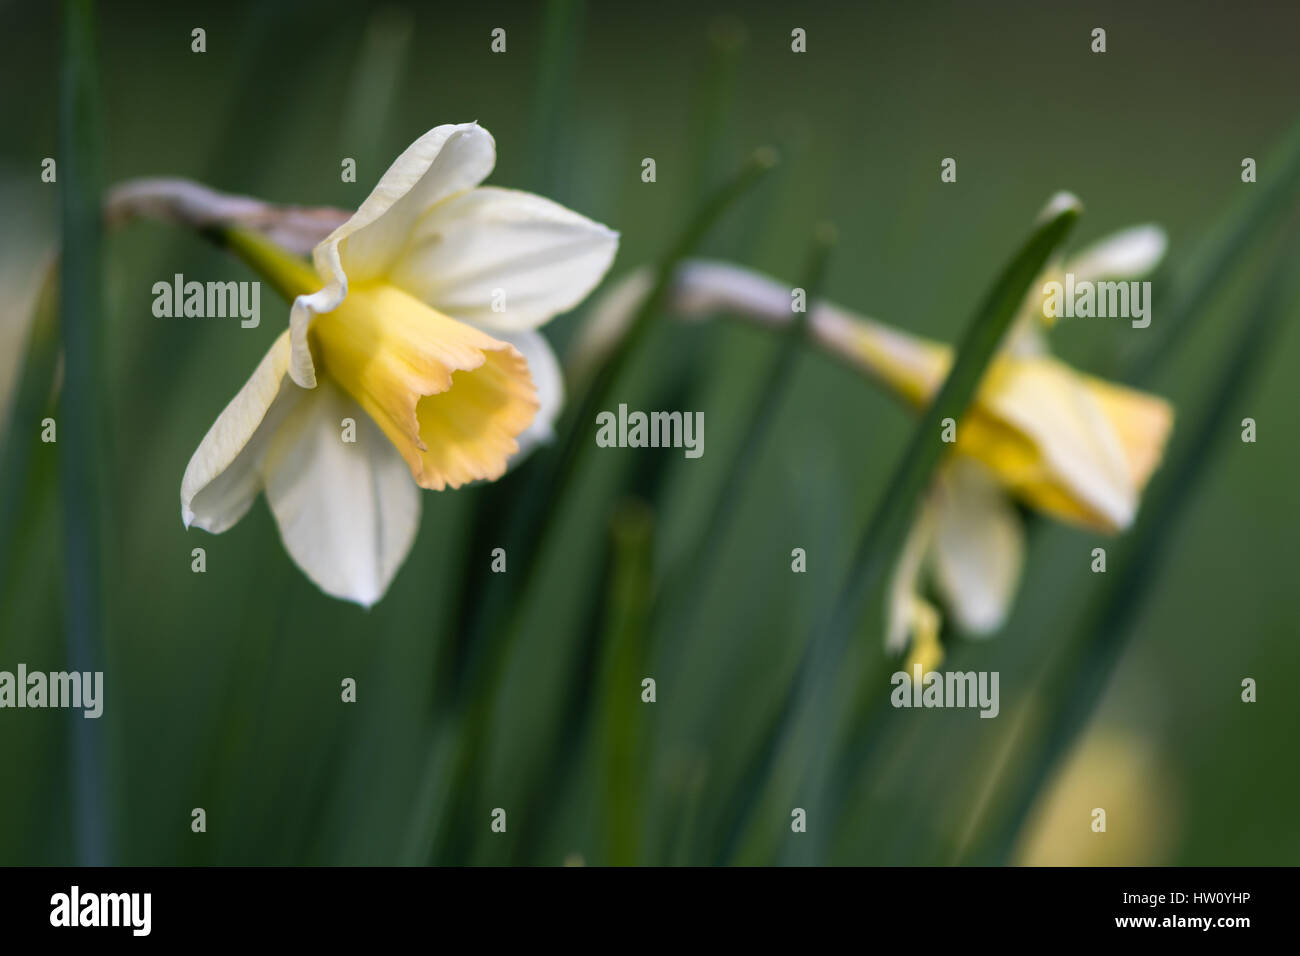 Daffodil Narcissus Waterperry flowers. Dainty yellow and ivory white flower of spring perennial plant in the Amaryllidaceae (amaryllis) family Stock Photo